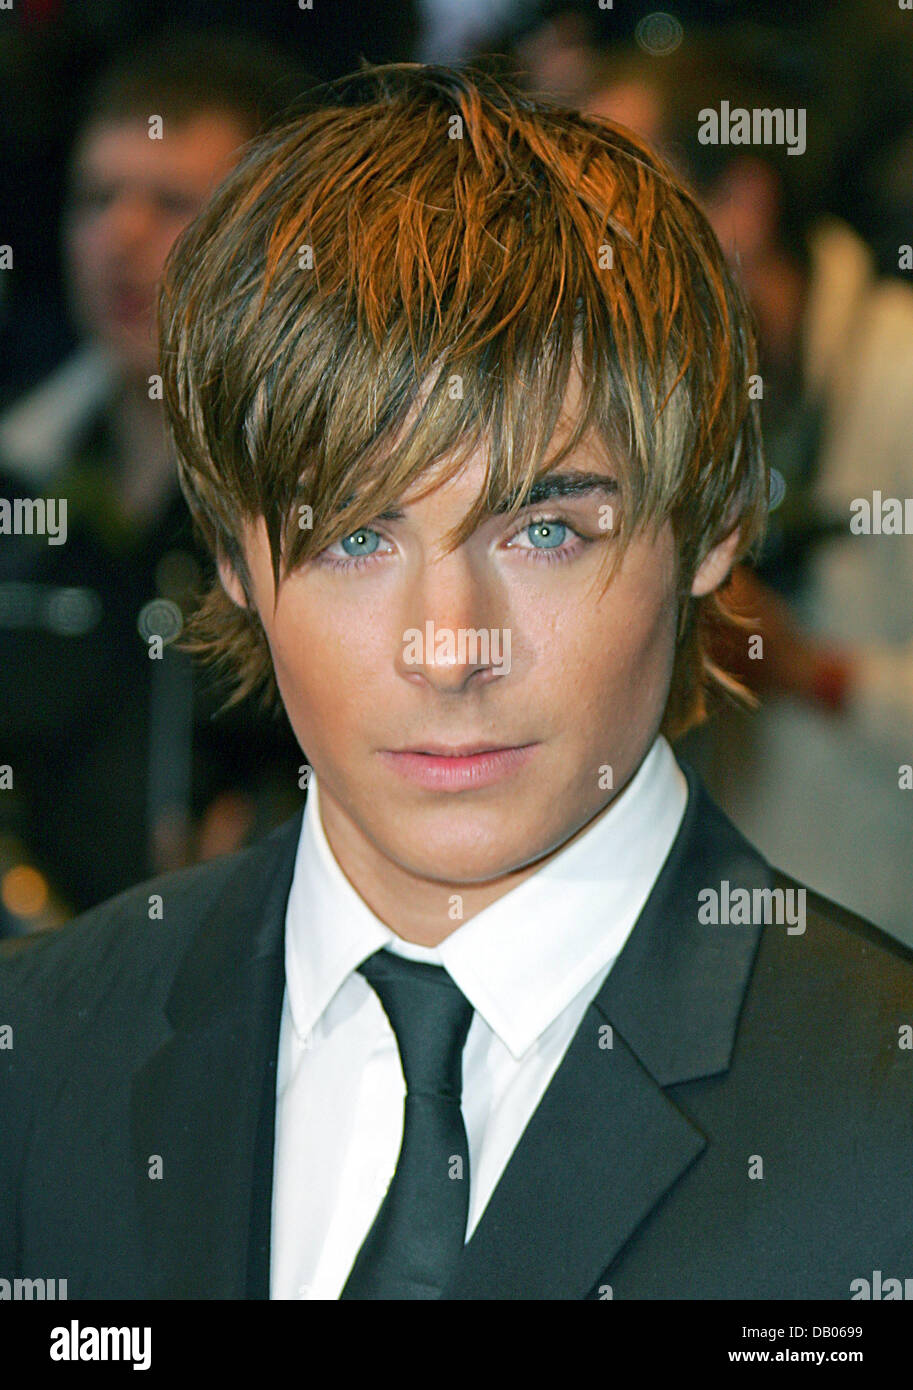 US-American actor Zac Efron arrives for the UK film premiere of Adam Shankman's film 'Hairspray' held at Odeon West End cinema in London, England, 05 July 2007. The film is an adaptation of the Tony award-winning Broadway production 'Hairspray', featuring new and original material based on John Water's 1988 classic about star-struck teenagers on a local Baltimore dance show. Photo: Stock Photo